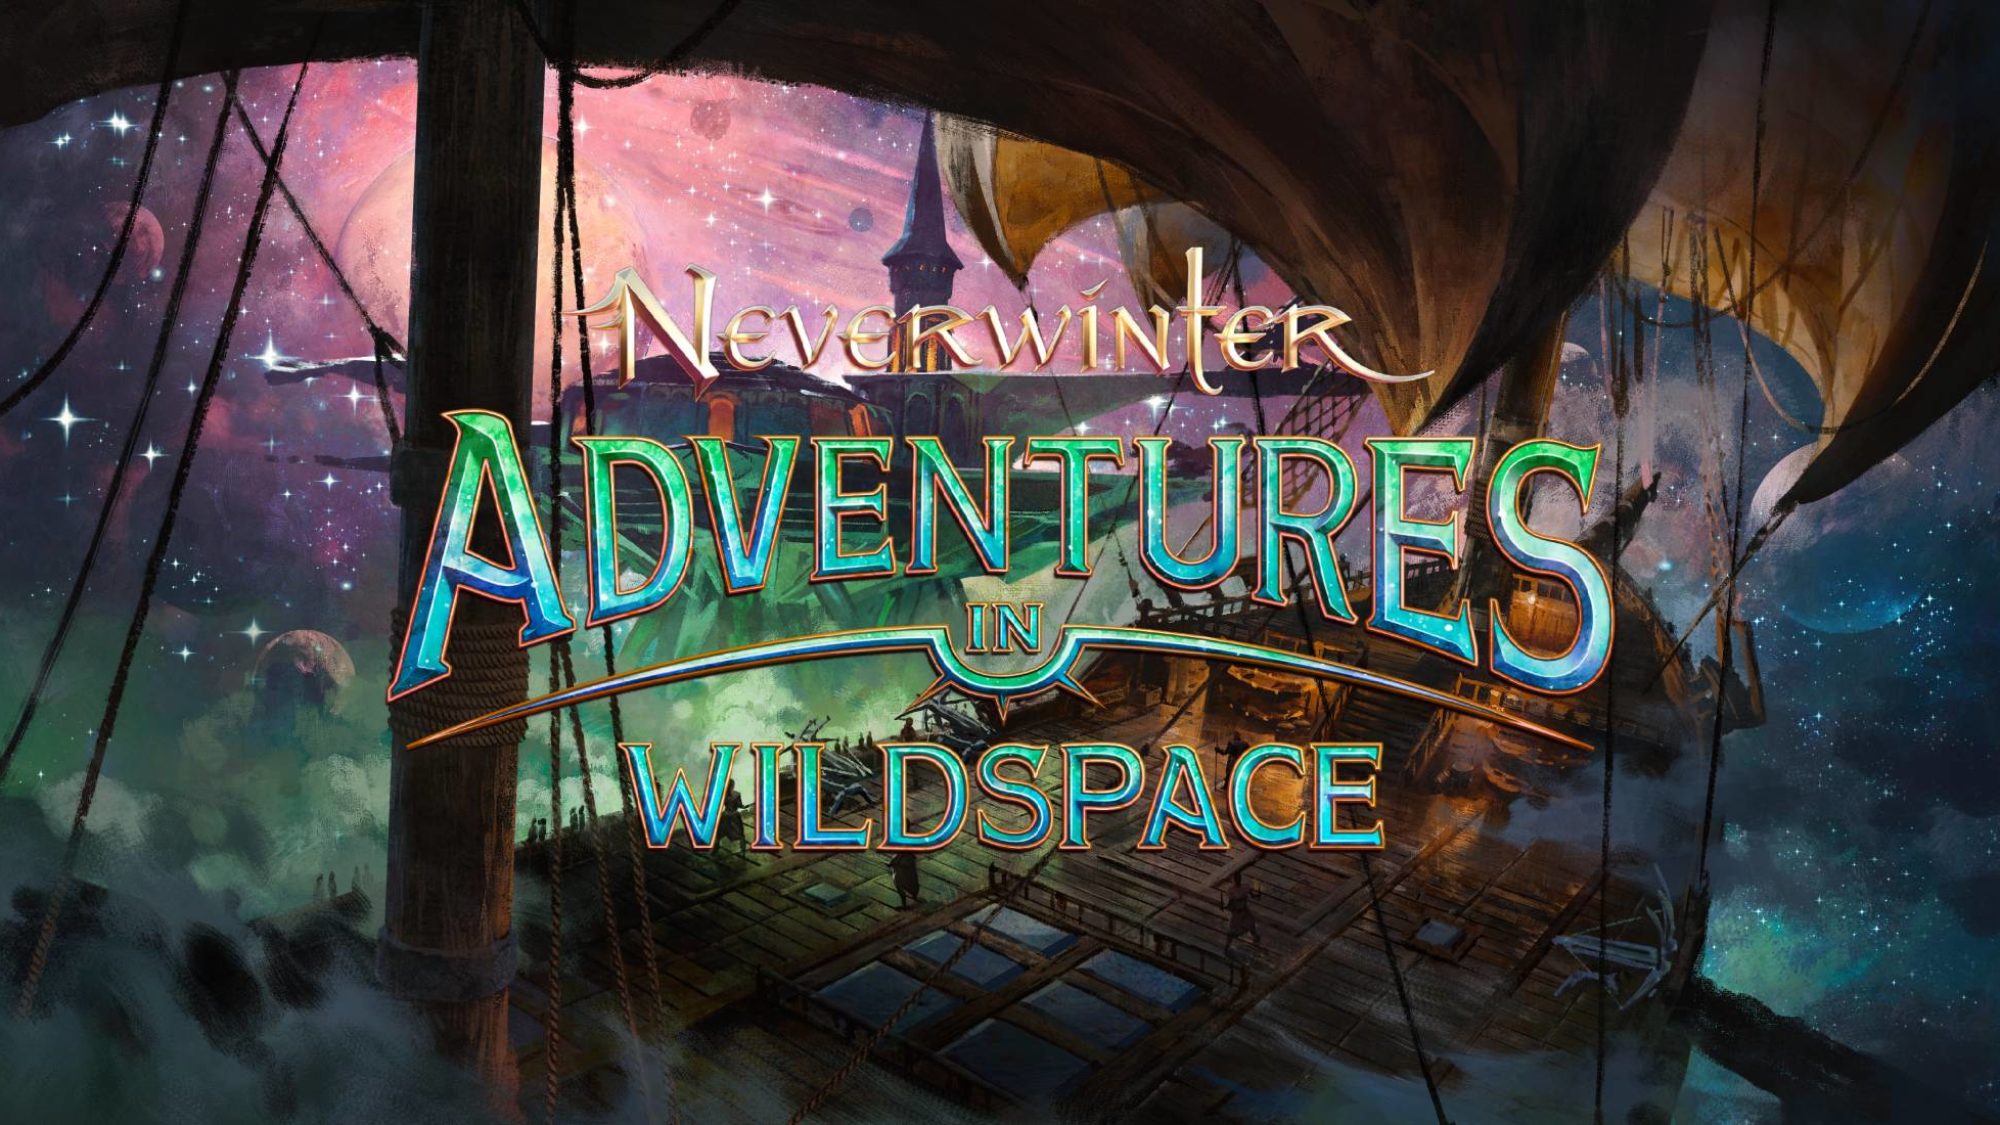 Neverwinter's Latest Expansion "Adventures in Wildspace" Introduces "The Imperial Citadel" and New Heroic Encounters 6